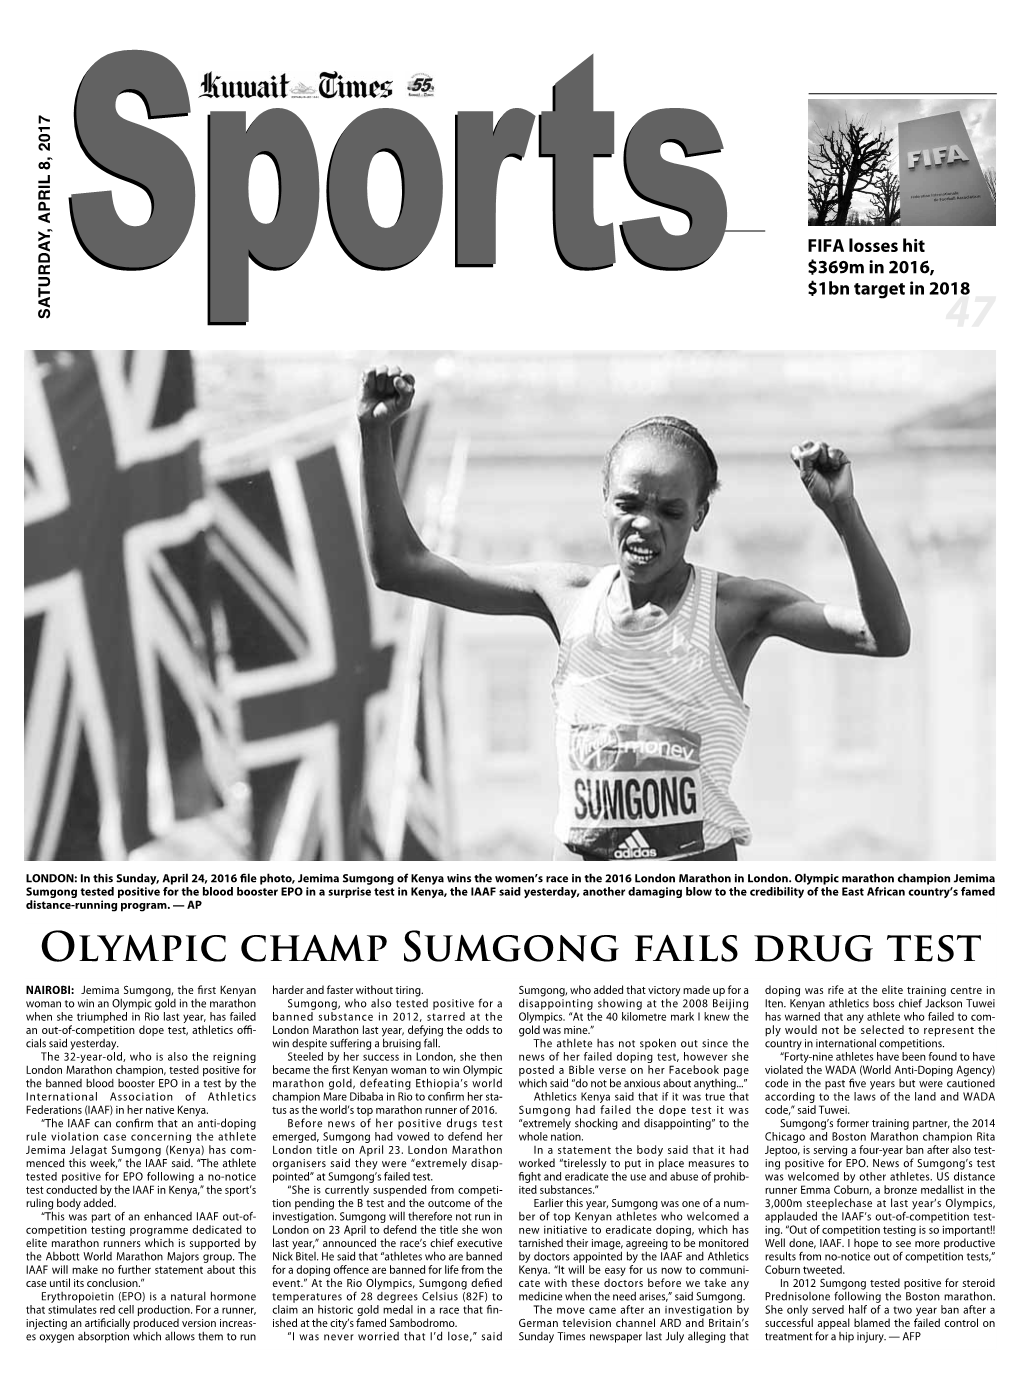 Olympic Champ Sumgong Fails Drug Test